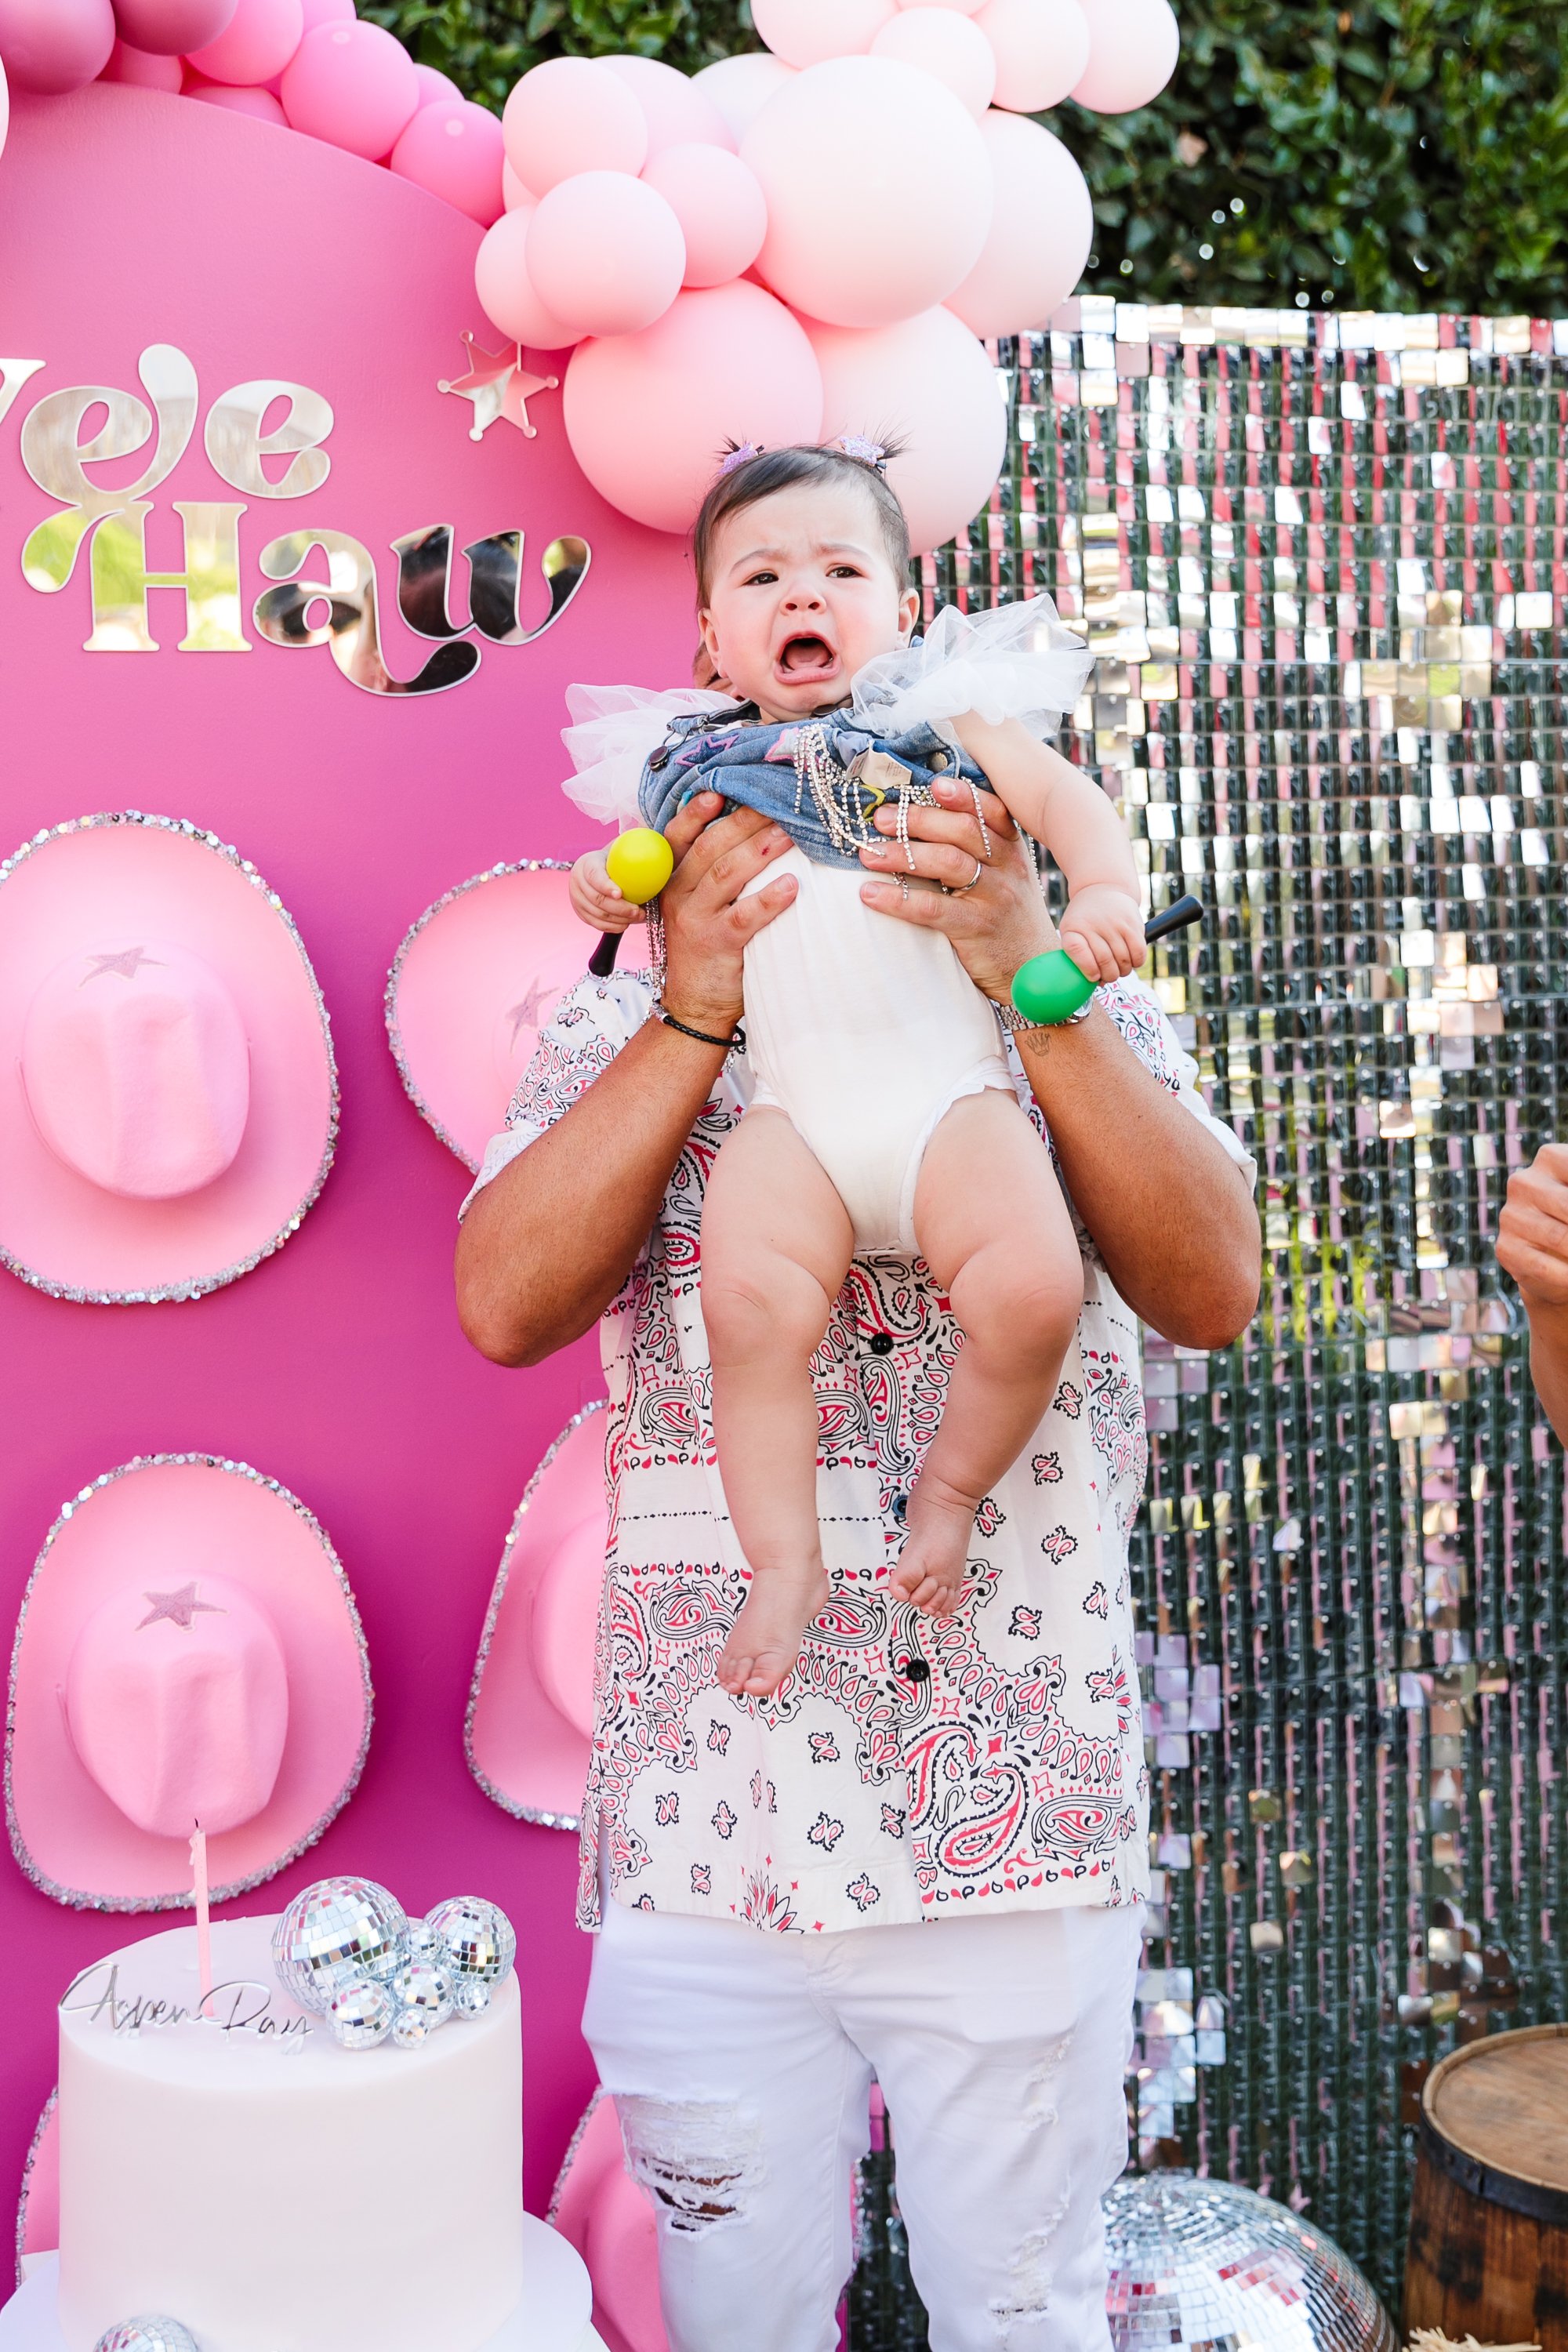 Los_Angeles_Party_Photographer_Luxury_Event_First_Birthday_Baby_Sherwood_Beverly_Hills_Cowboy_Disco_Theme_Girl_Child_Family_Photography-1443.jpg